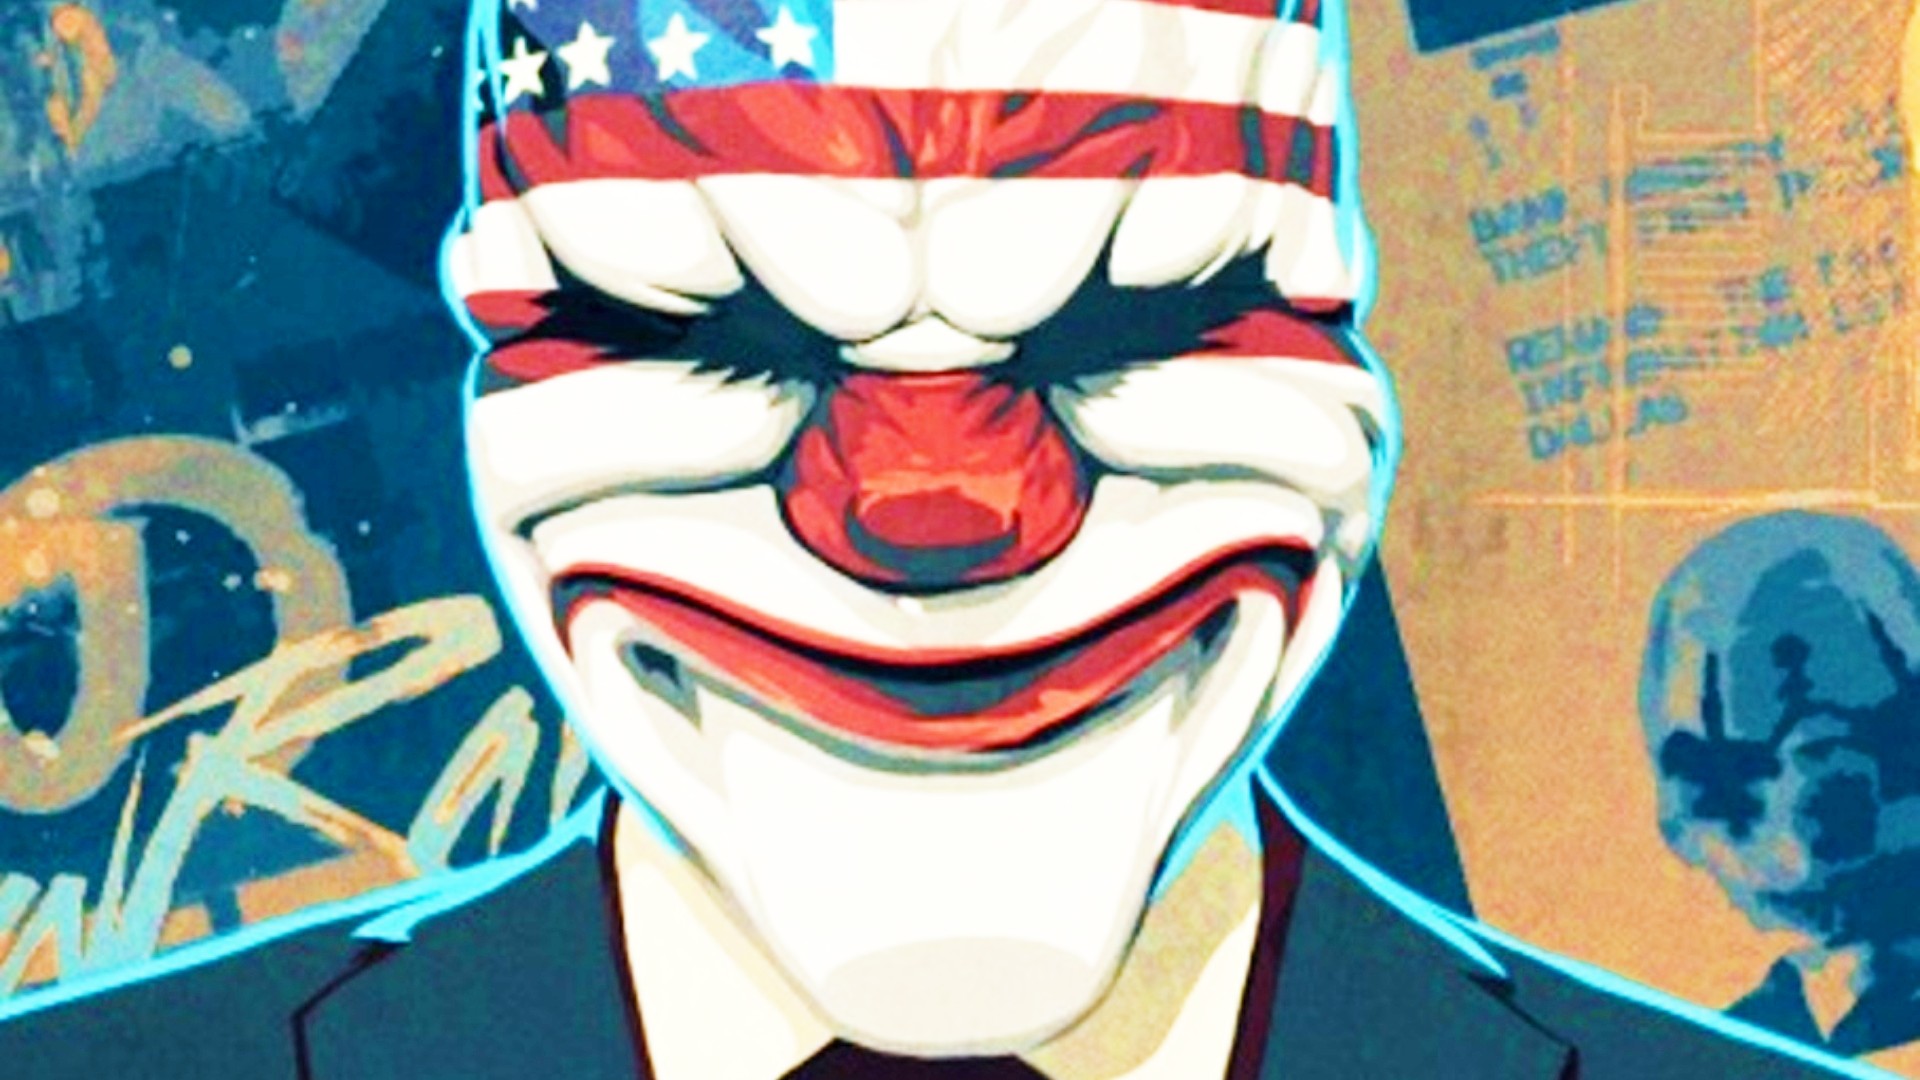 After server outages, Payday 3 devs looking into being less